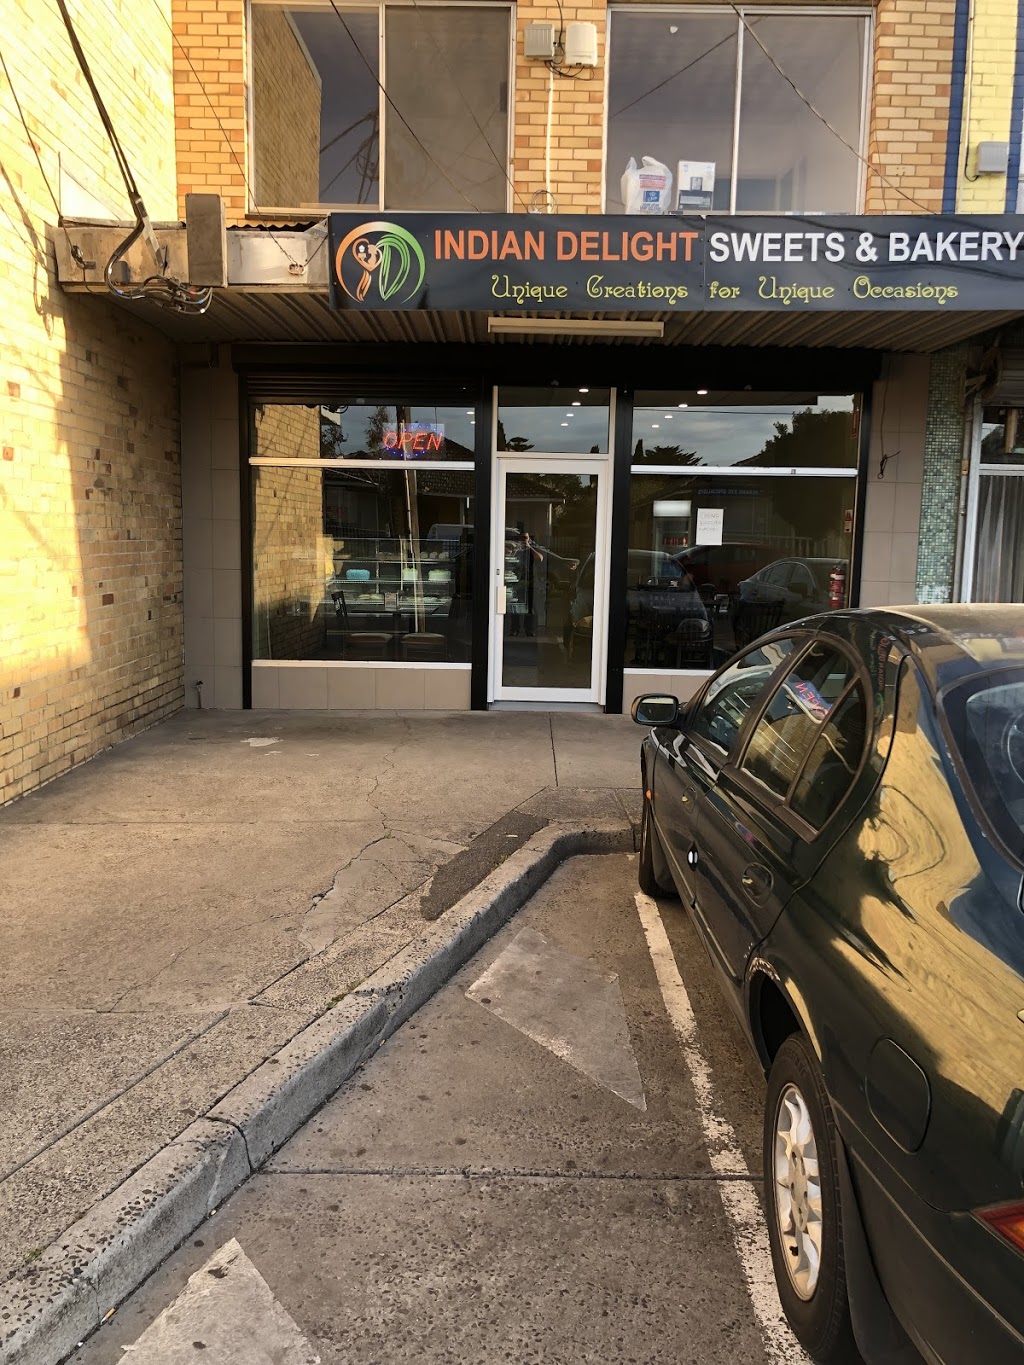 INDIAN DELIGHT SWEETS & BAKERY | bakery | 173 Main Rd W, St Albans VIC 3021, Australia | 0450503498 OR +61 450 503 498